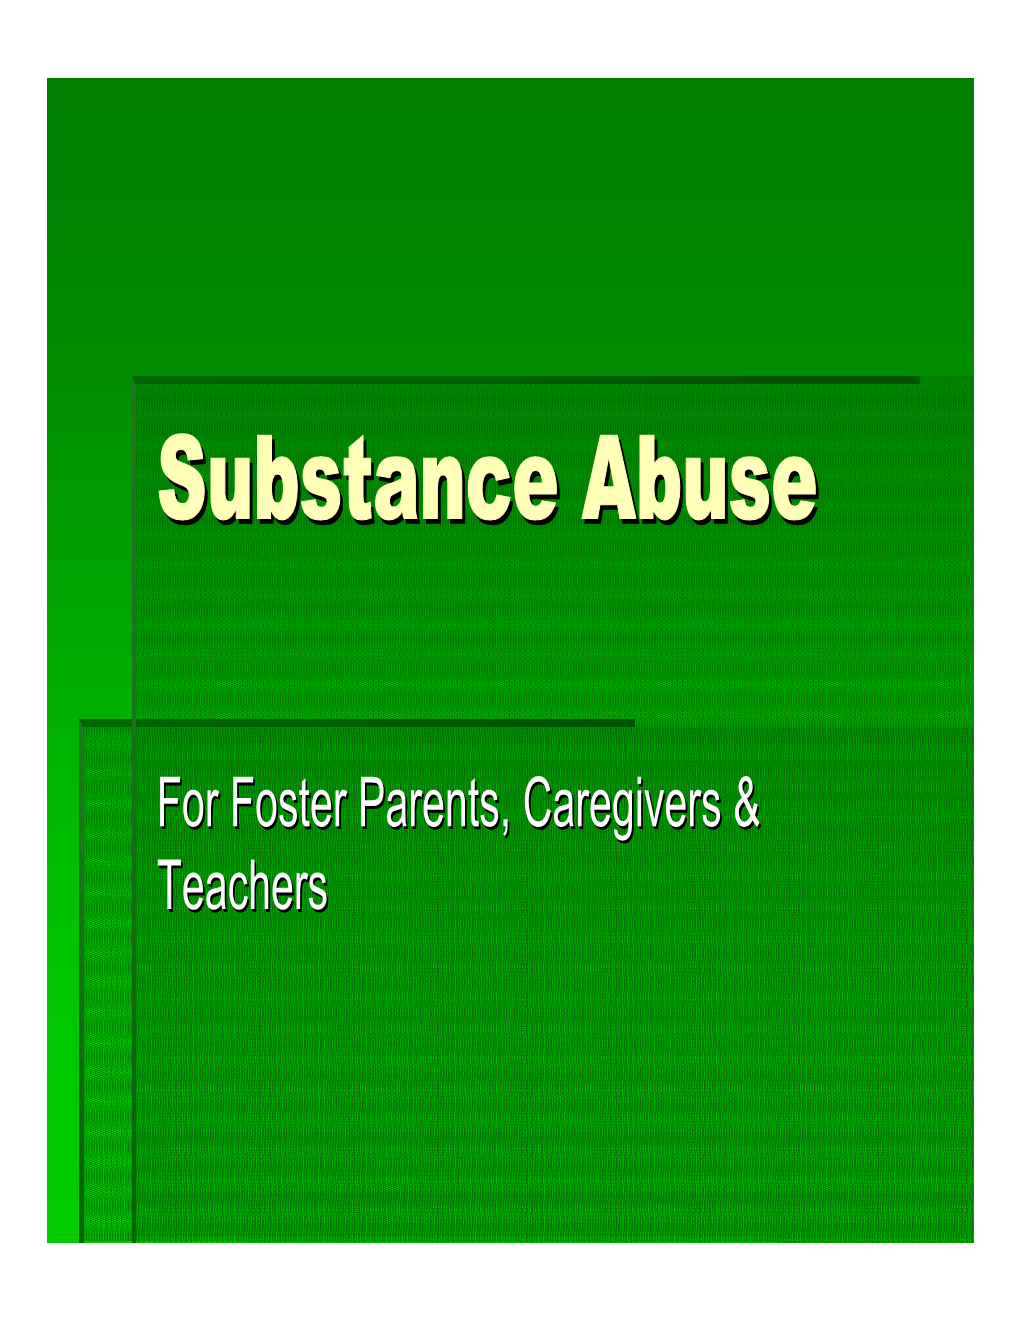 Substance Abuseabuse